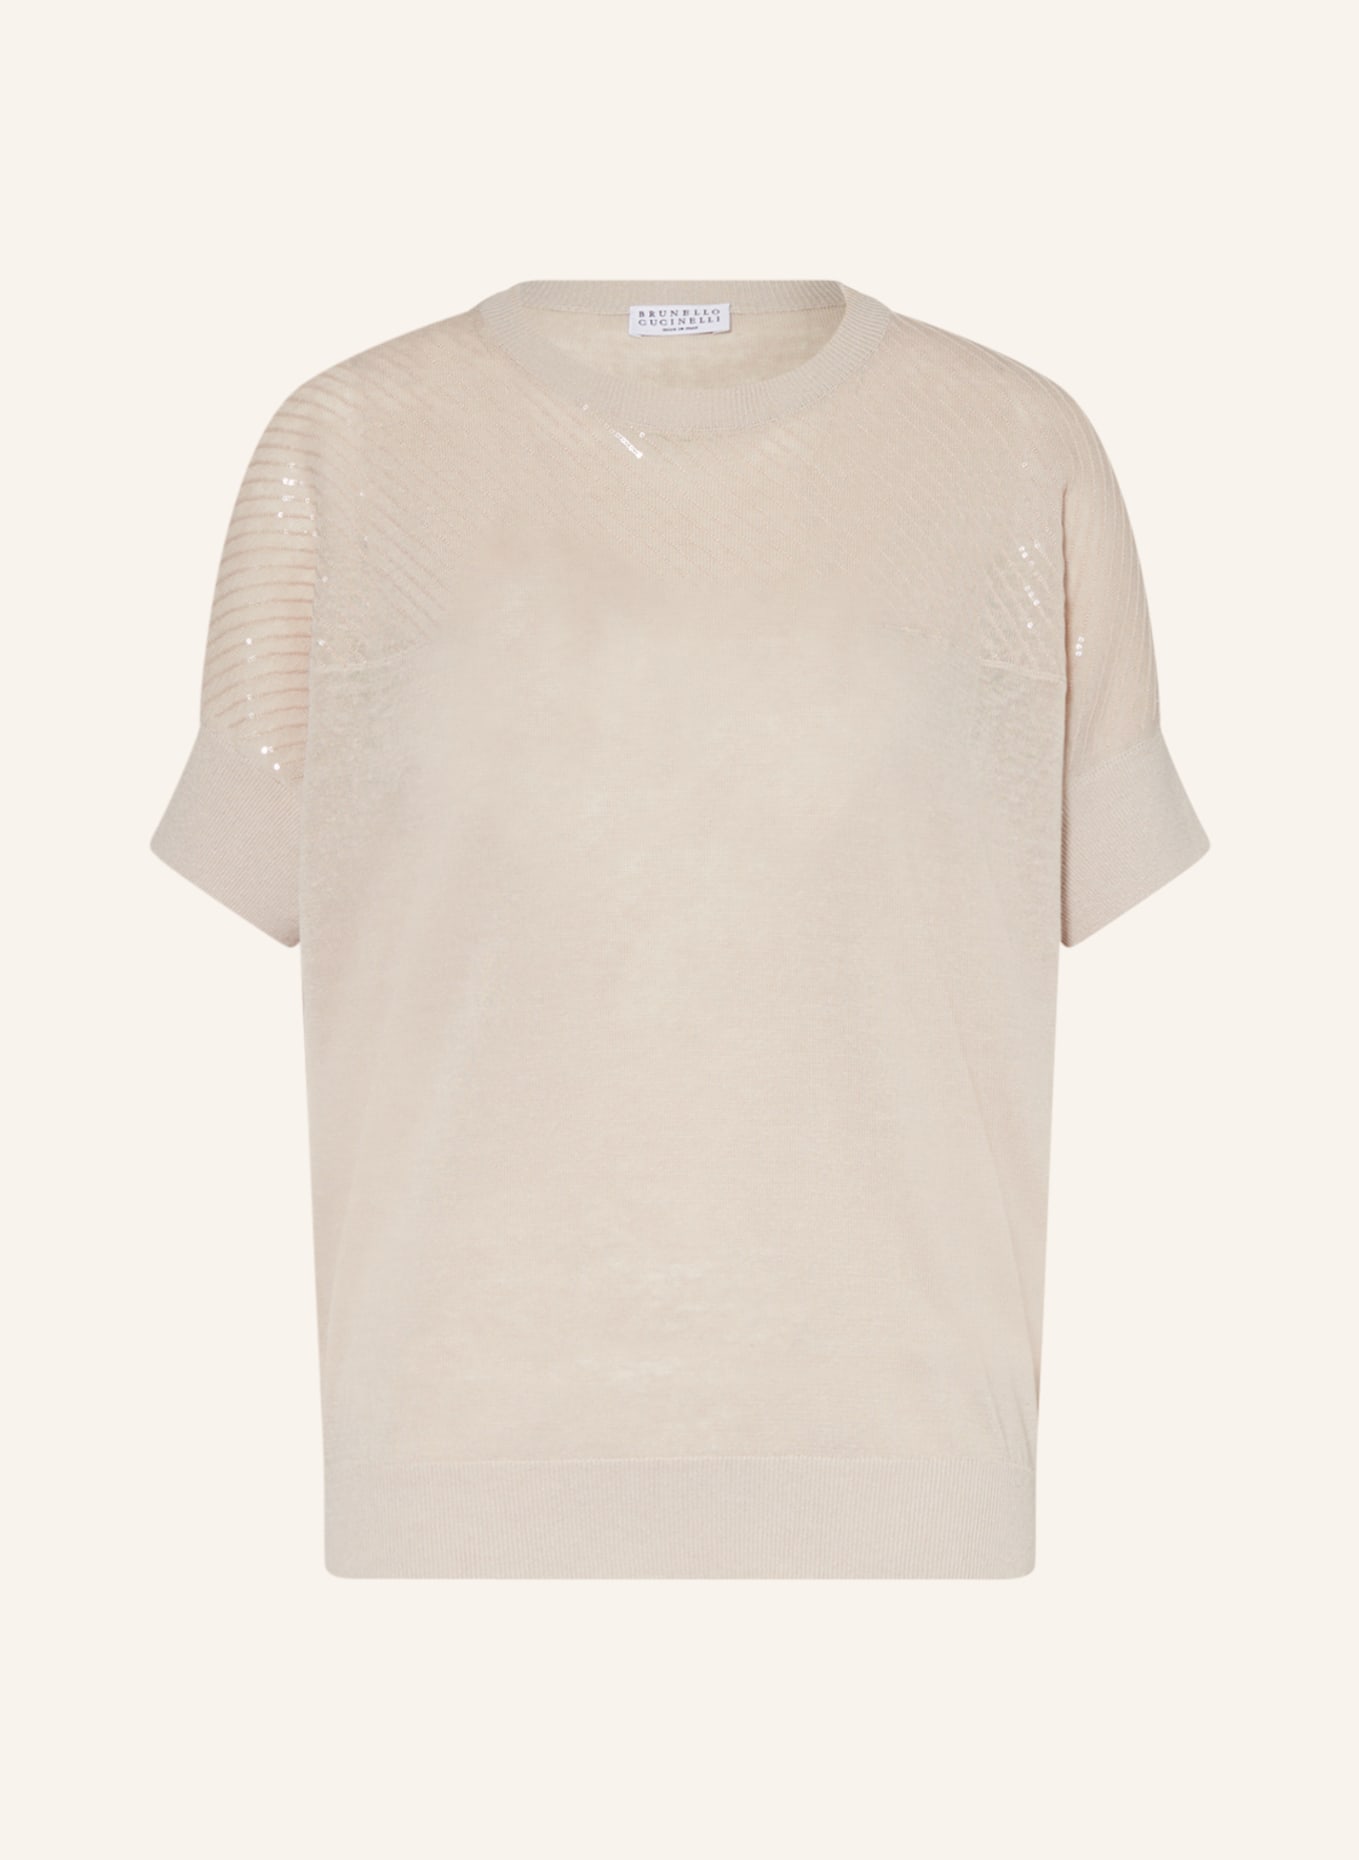 BRUNELLO CUCINELLI Knit shirt made of linen with sequins, Color: CREAM (Image 1)